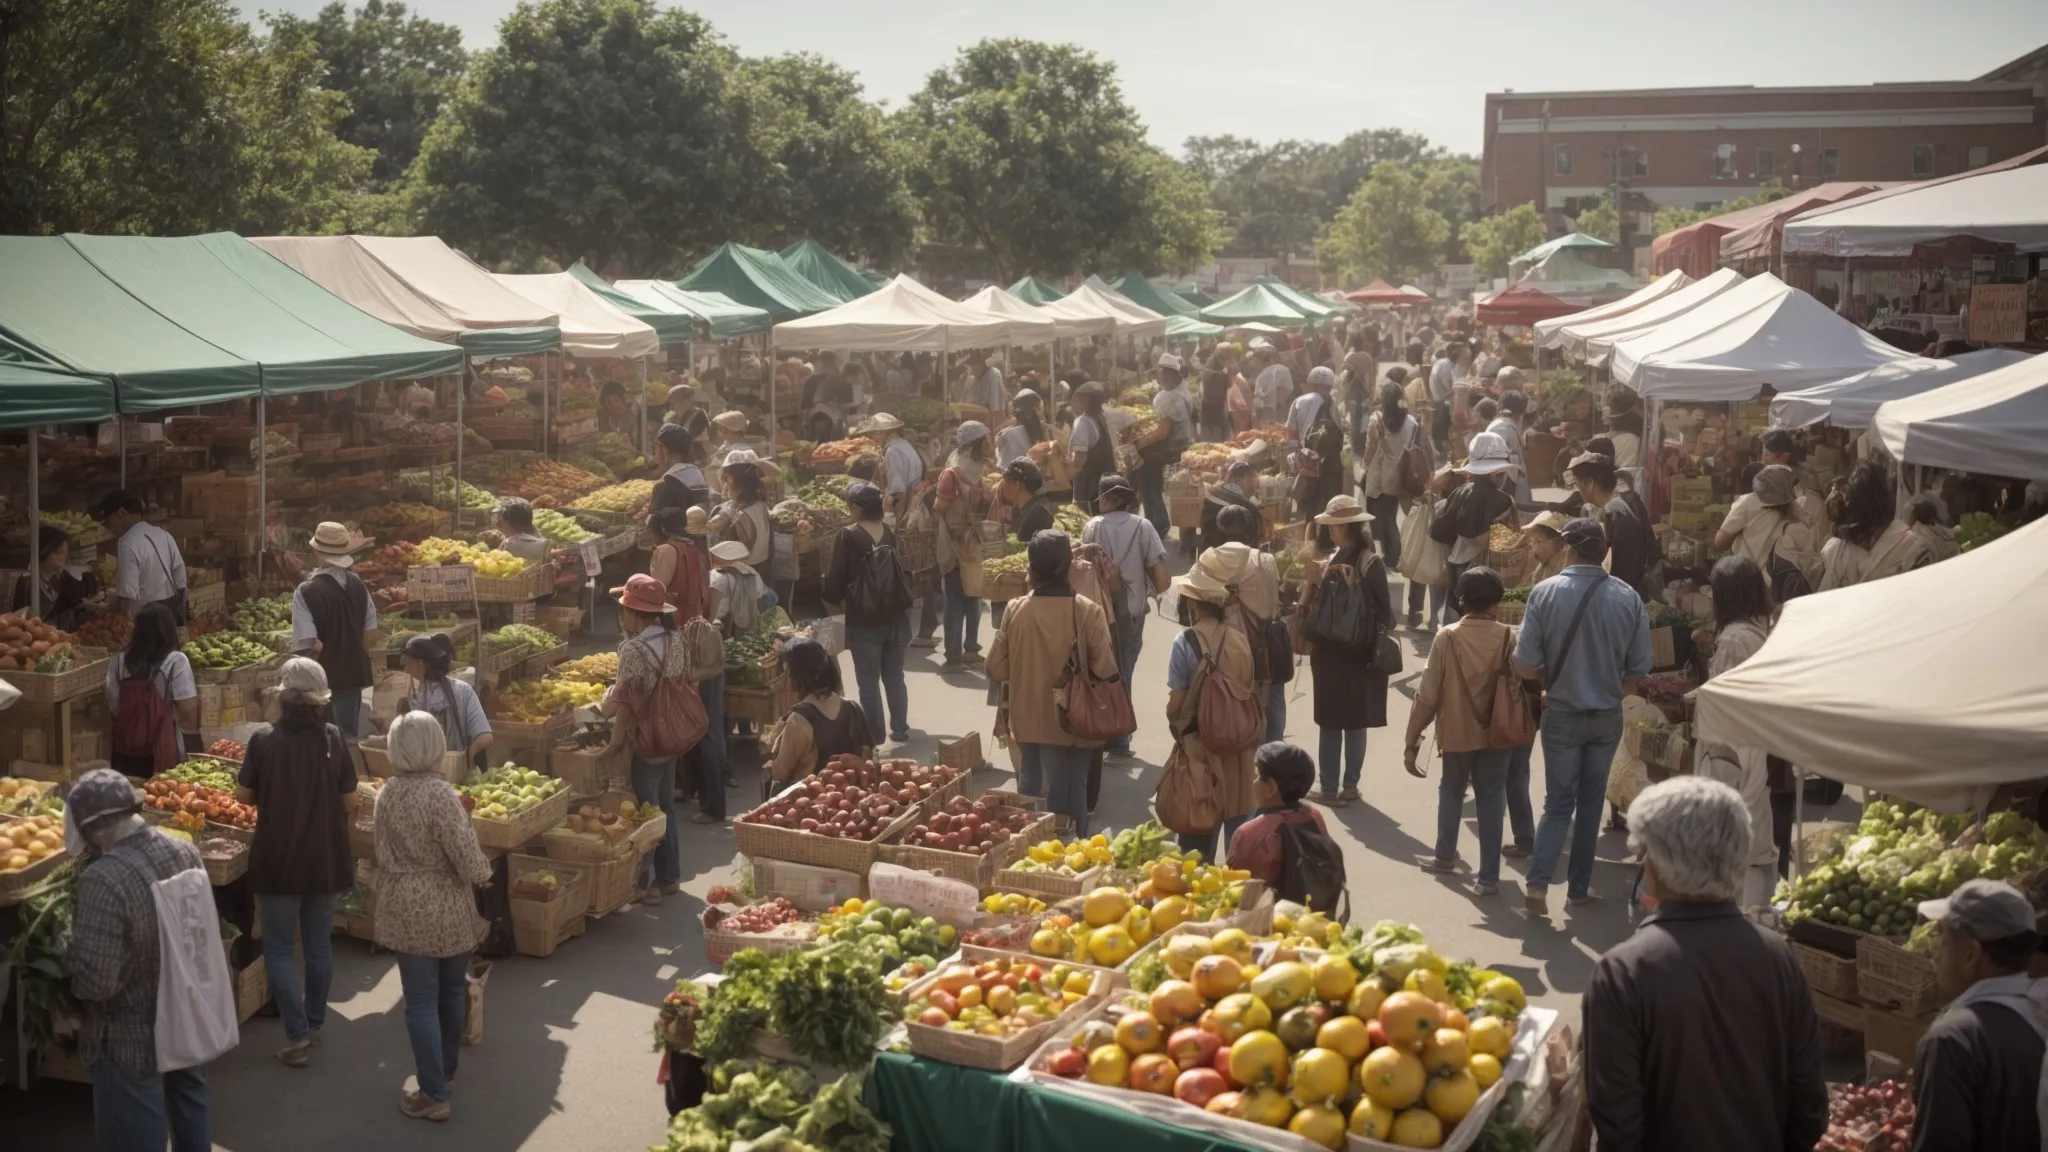 a bustling local farmers market with vendors displaying fresh produce to a diverse group of engaged shoppers.